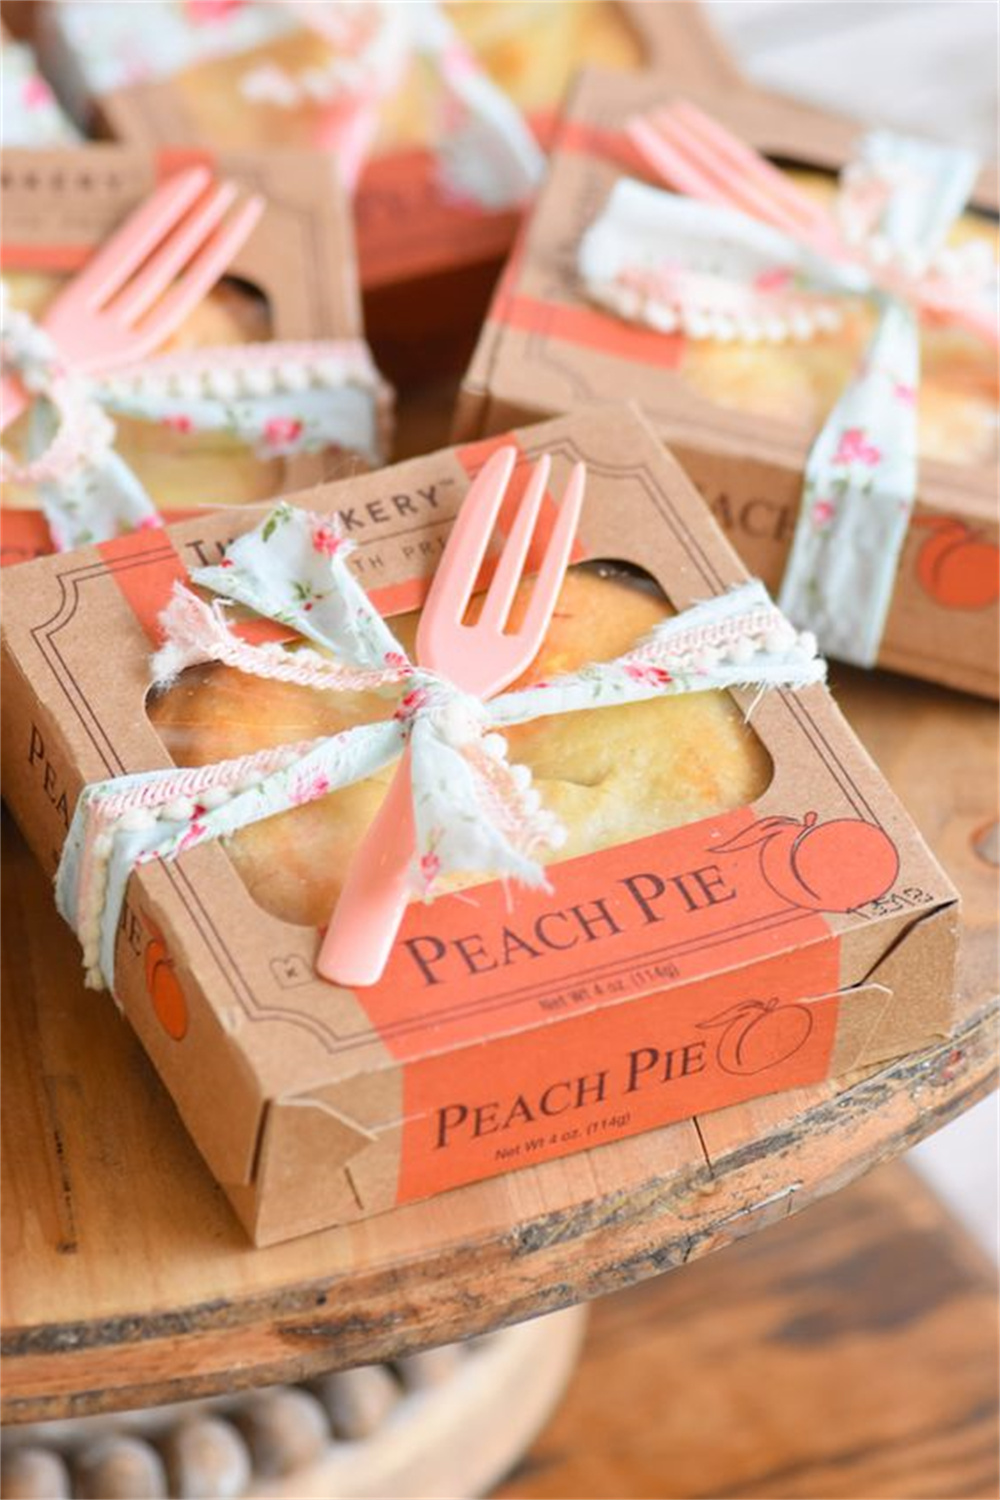 Peach Wedding Favors with Pies